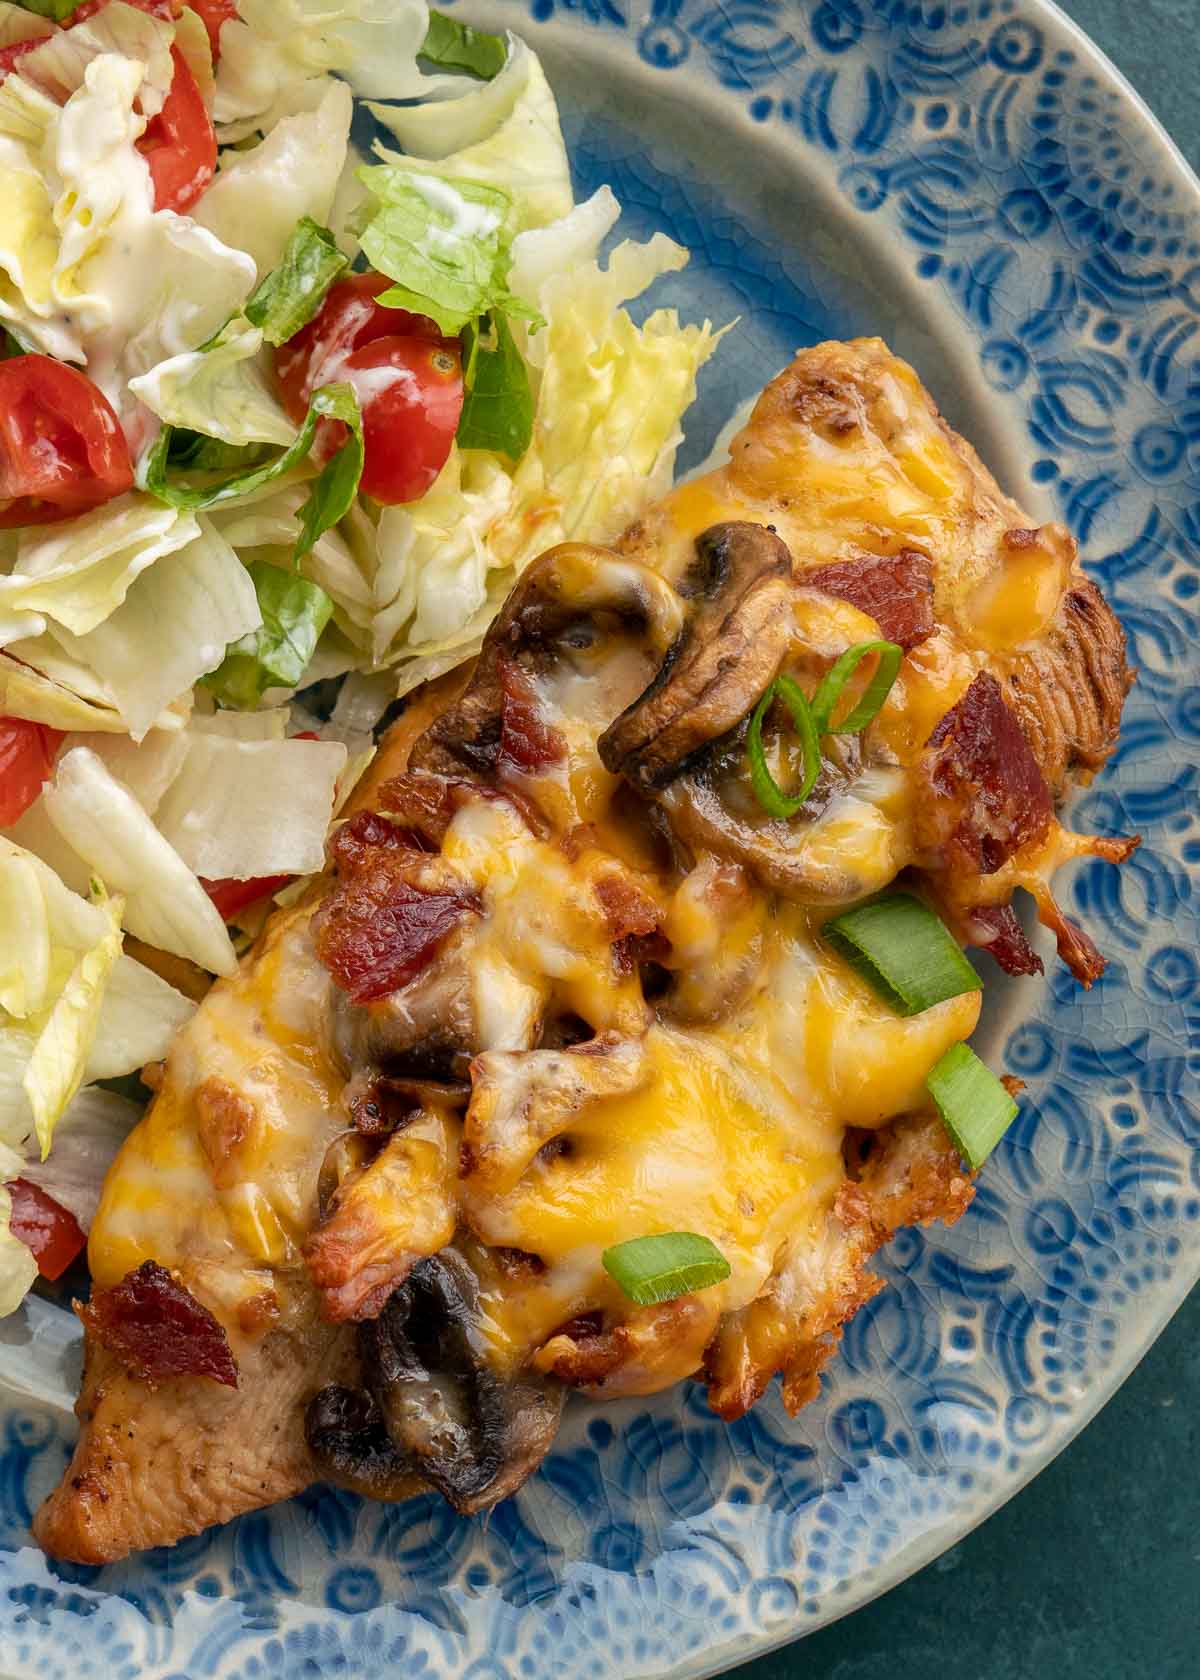 Cheese covered chicken and a salad on blue plate